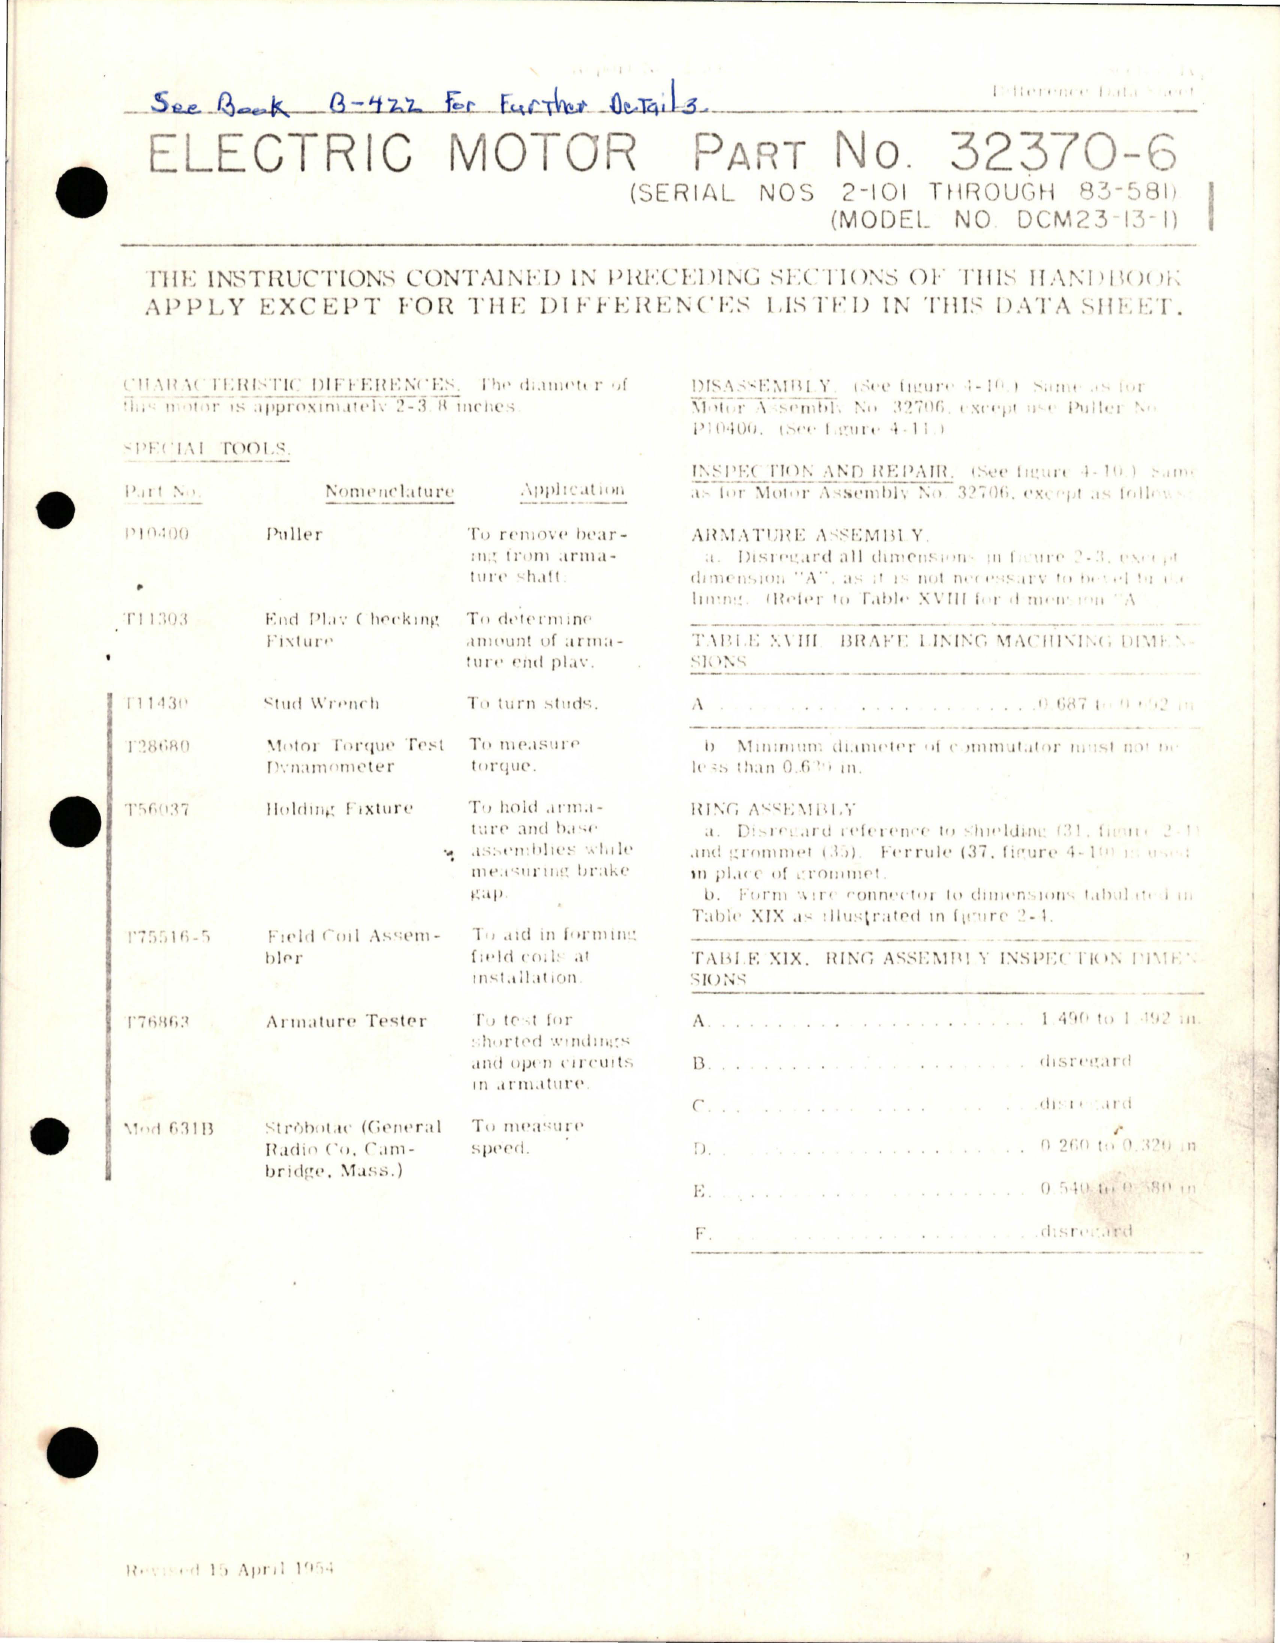 Sample page 1 from AirCorps Library document: Difference Data Sheet for Electric Motor - Part 32370-6 - Model DCM23-13-1